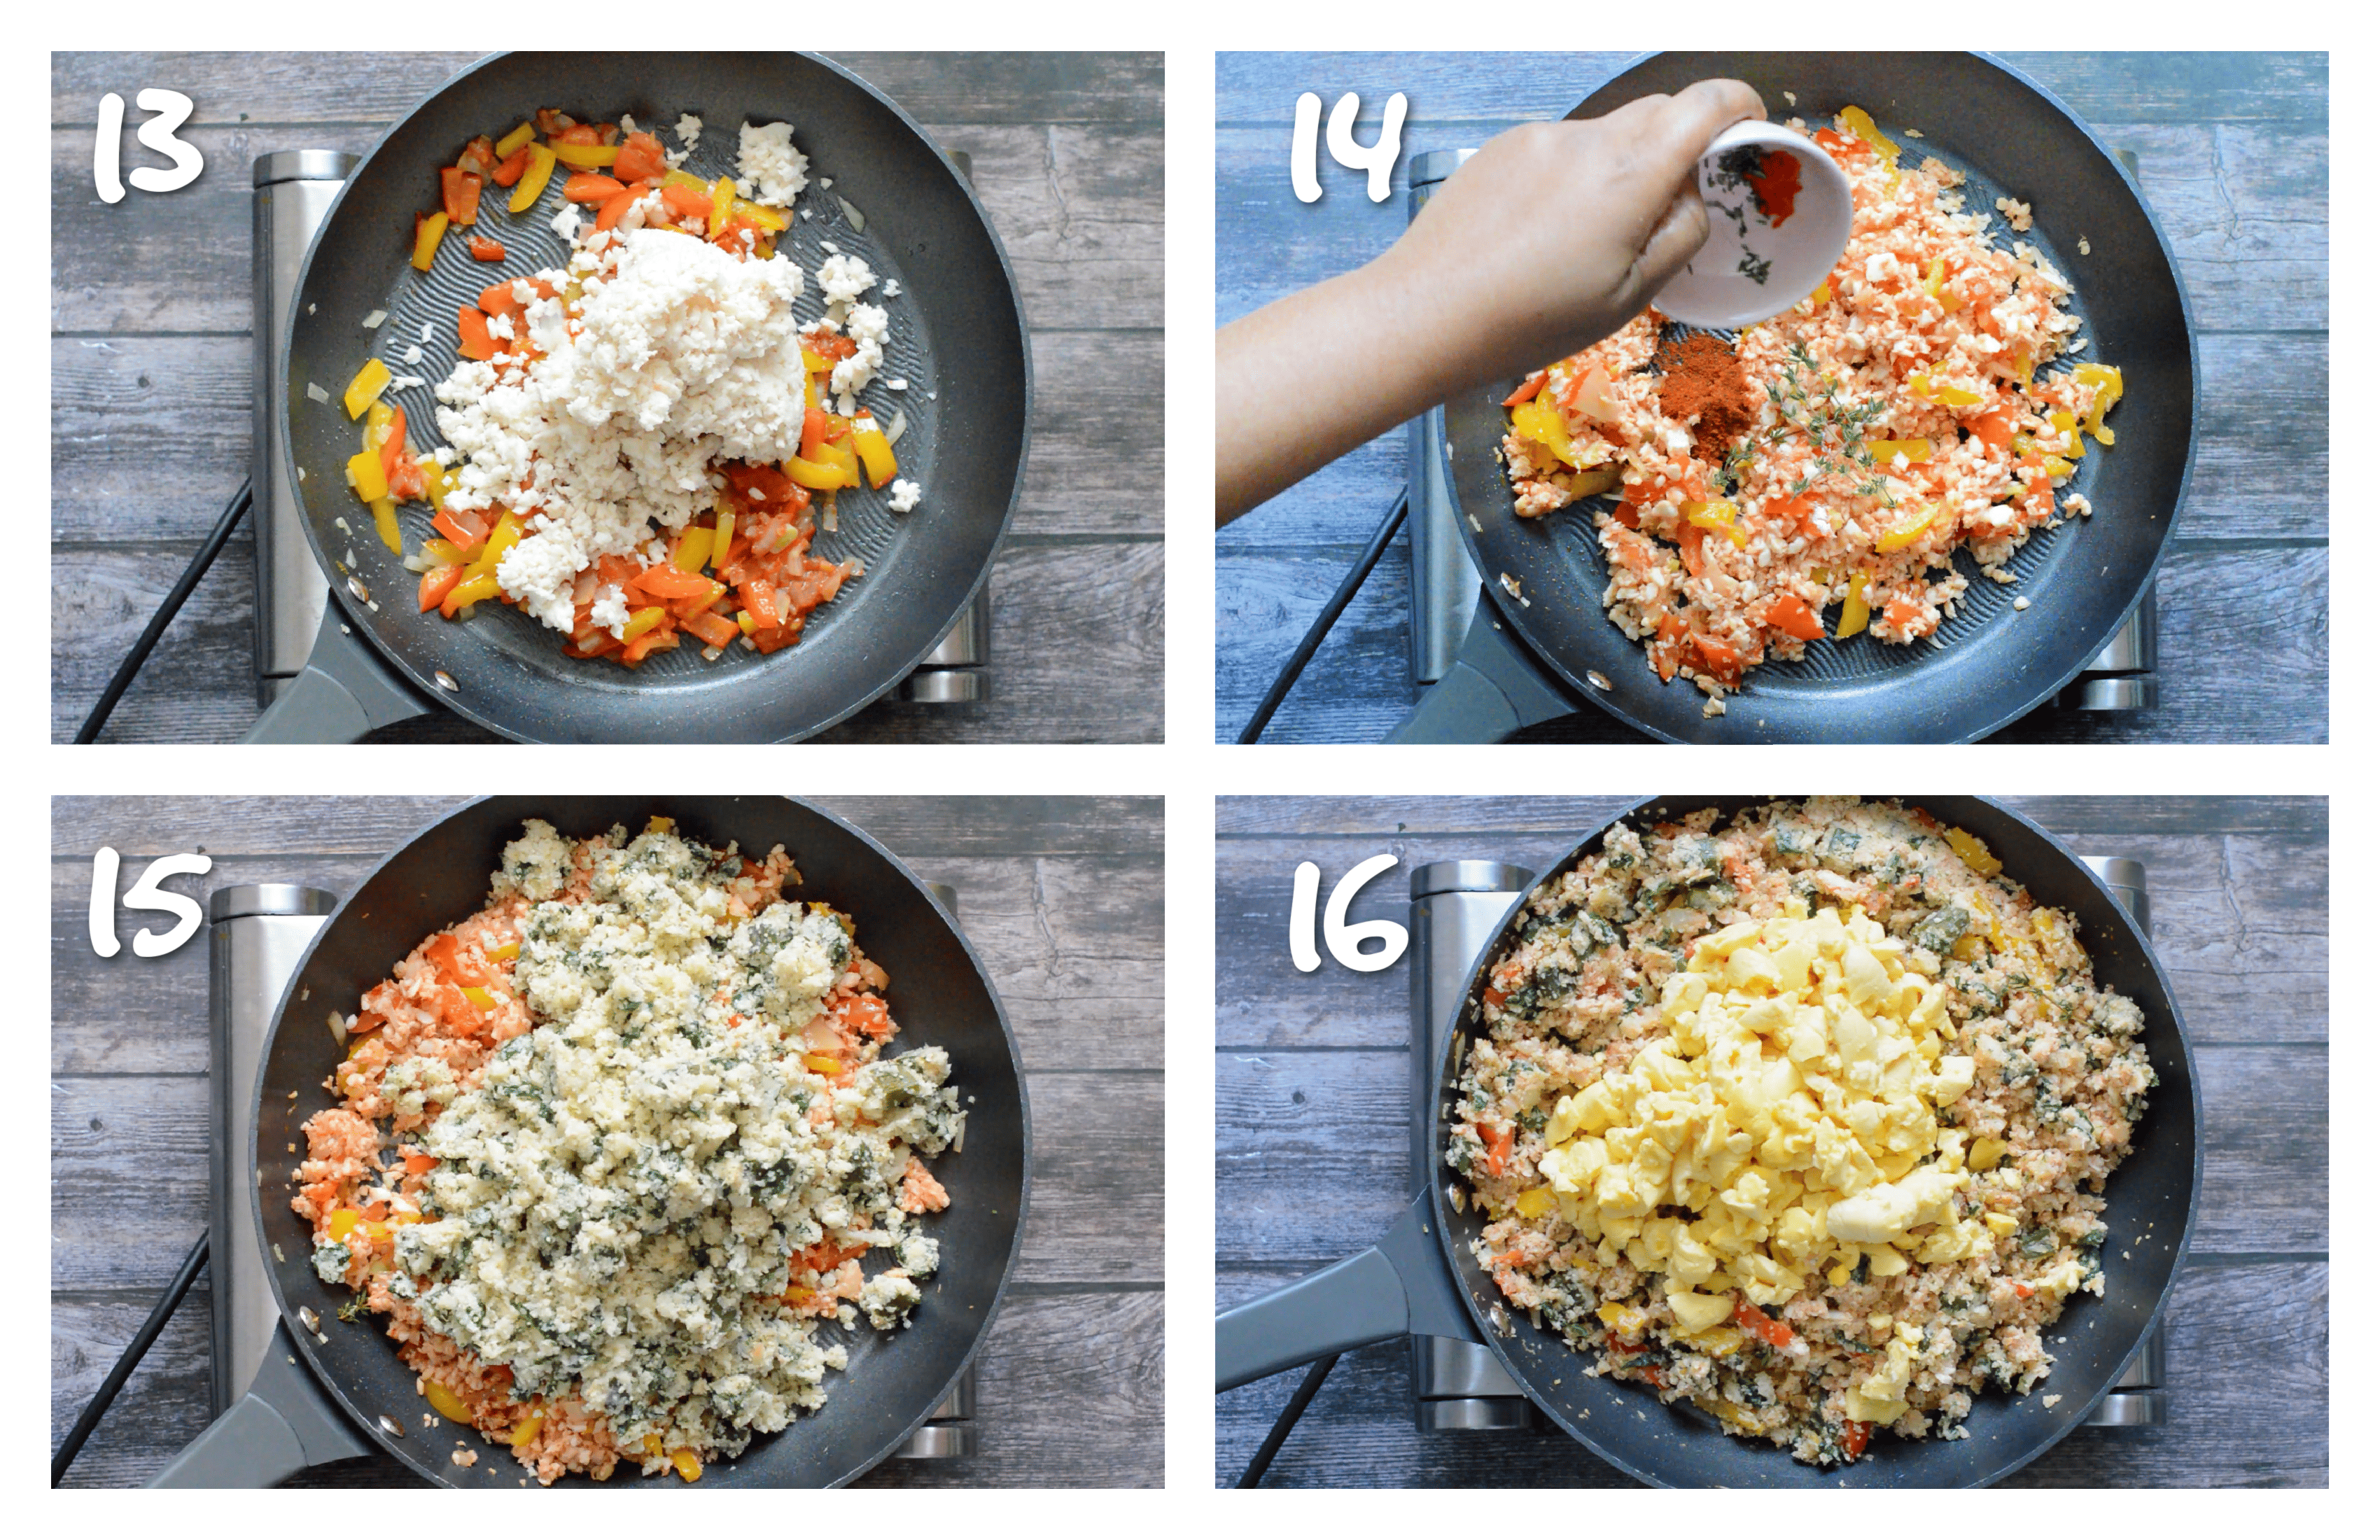 Steps 13-16 adding saltfish, rice and ackee